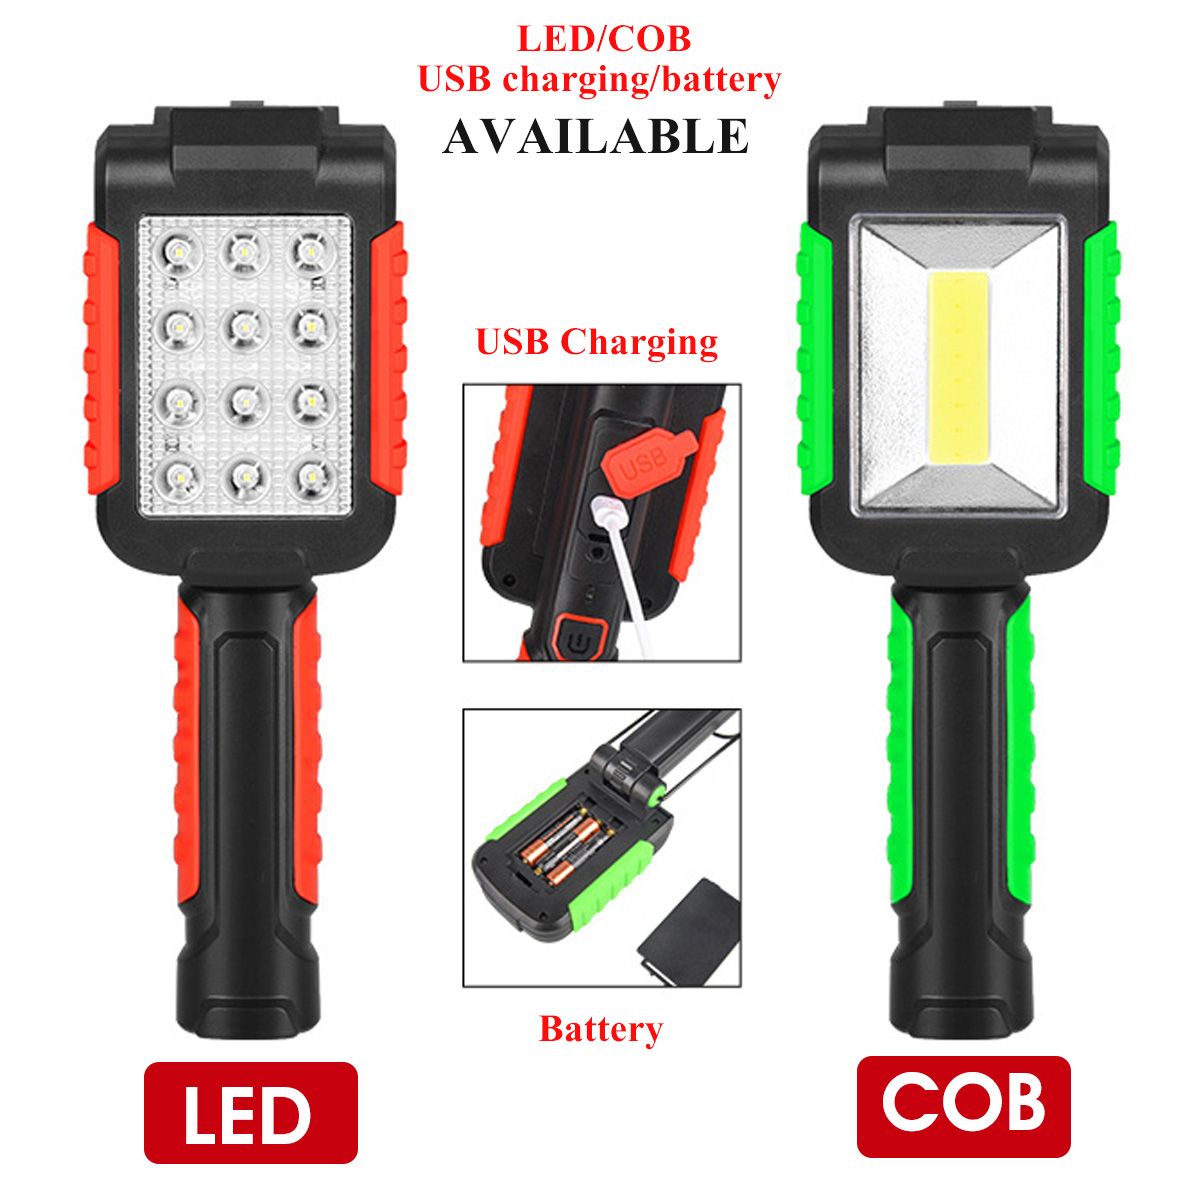 COBLED-Work-Light-USB-ChargingBattery-Type-With-Magnet-Base-for-Car-Maintenance-Outdoor-Camping-1657282